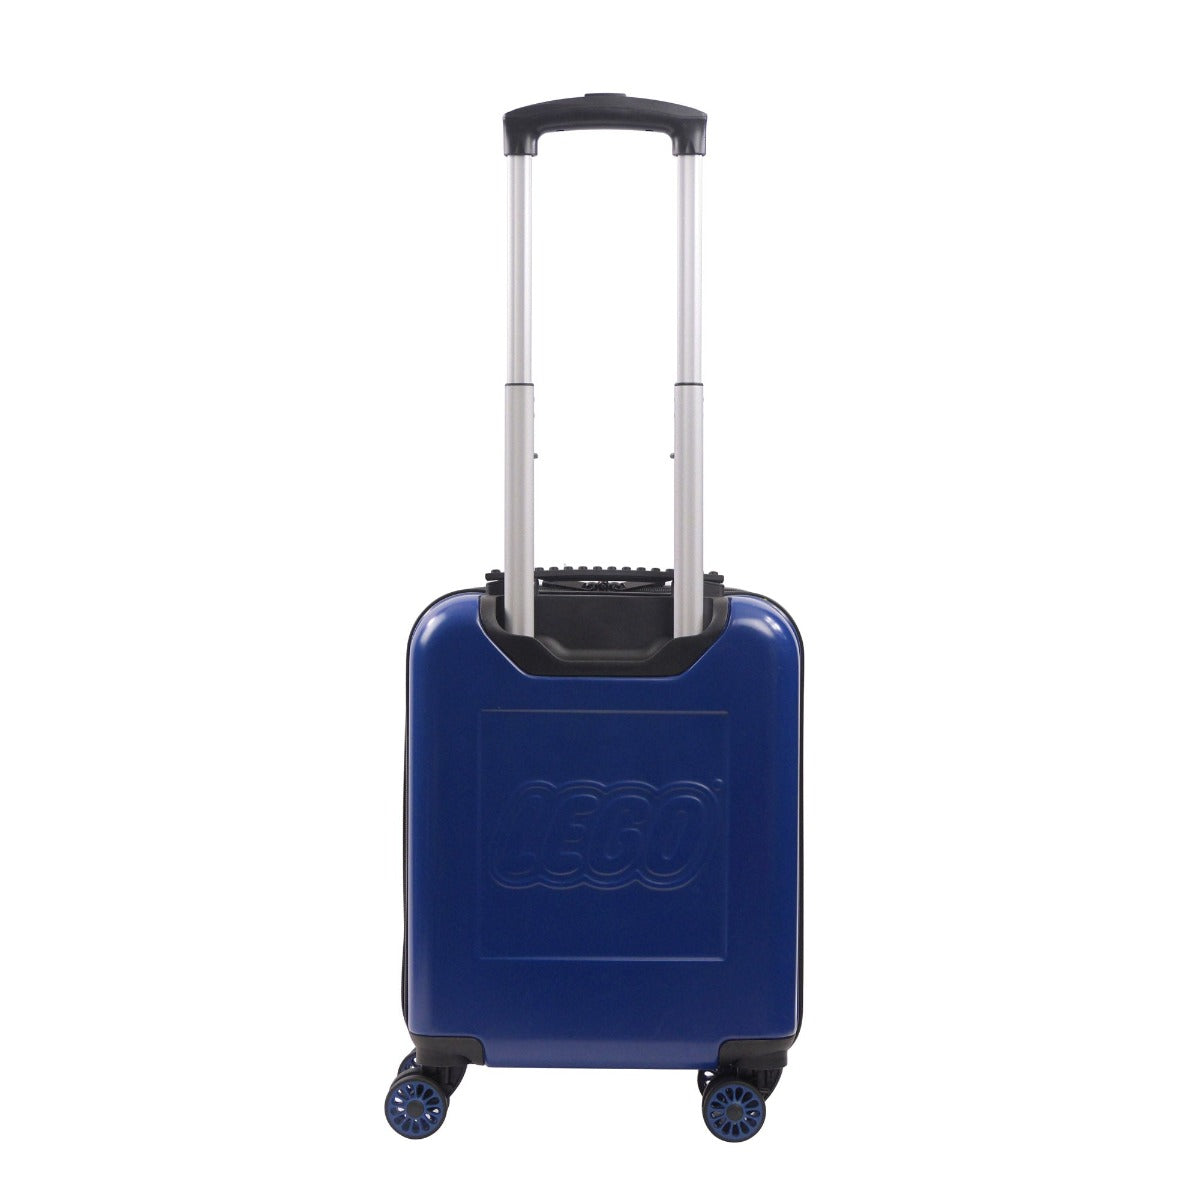 Blue Playdate Lego City Awaits 18" carry-on rolling luggage for kids